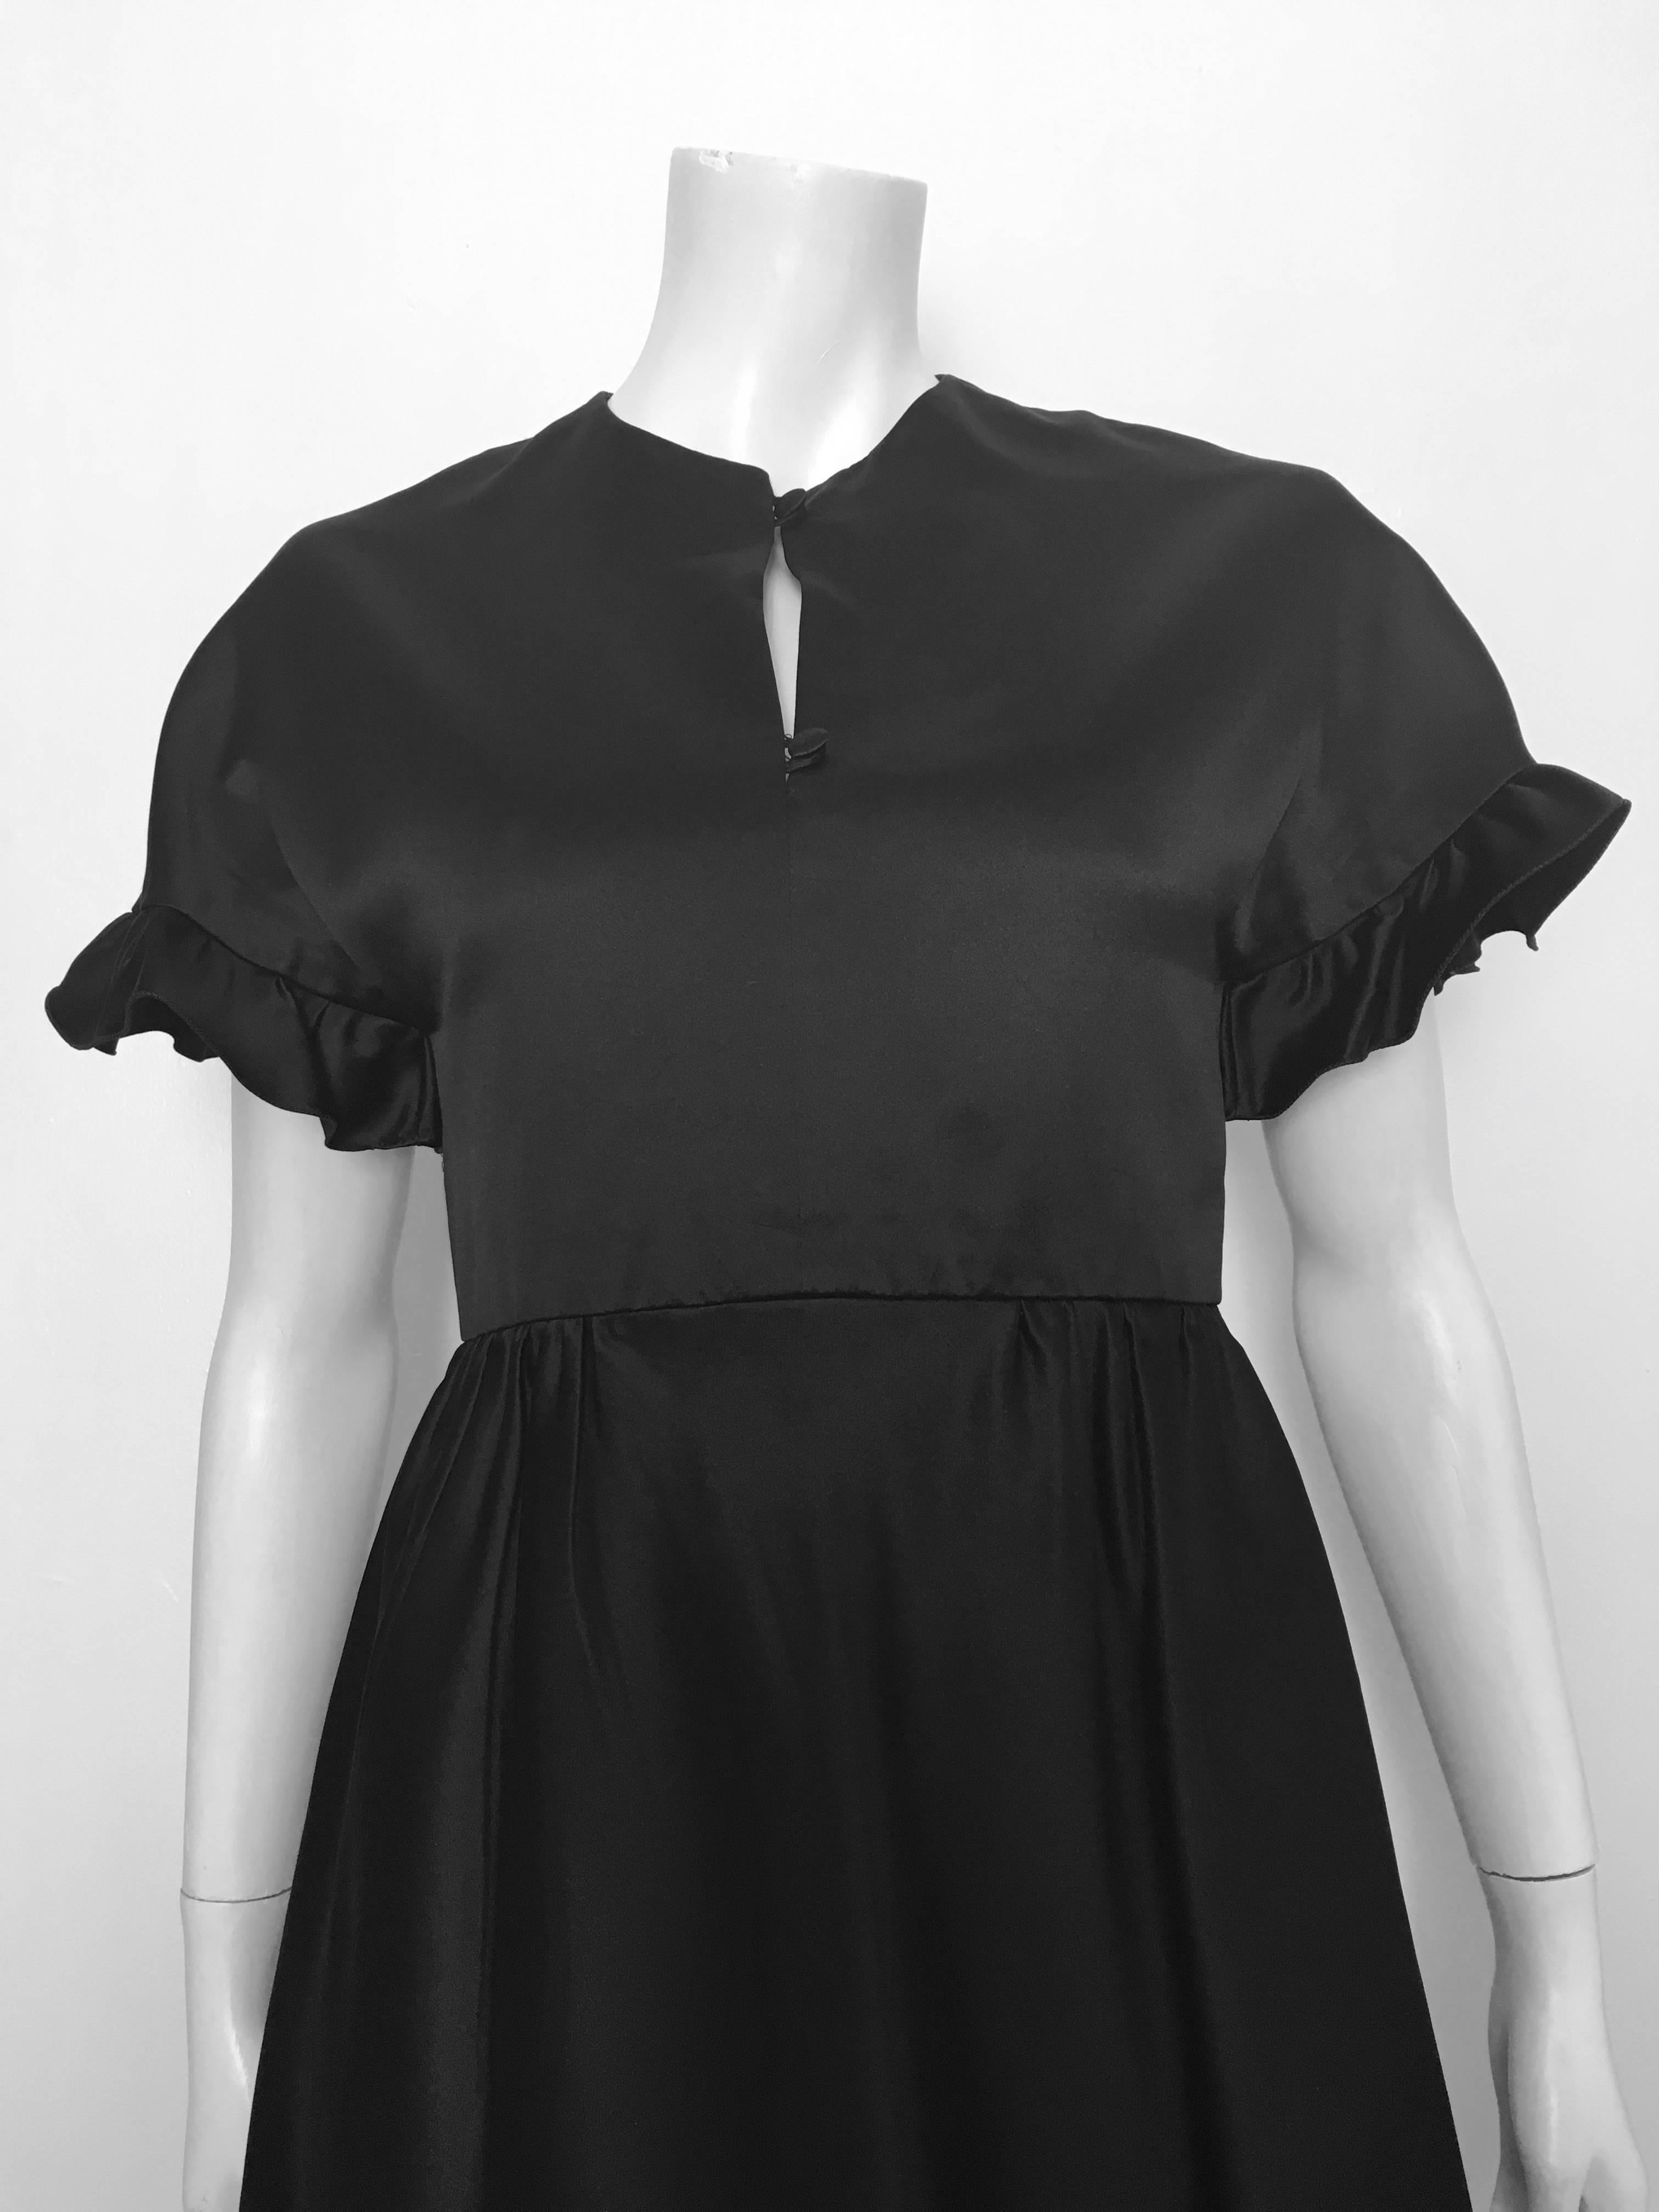 Valentino Boutique 1960s black silk cocktail evening dress with pockets is a size 4.  Ladies please use your measuring tape so you can properly measure your bust, waist & hips so you know this gorgeous vintage piece will fit your body to